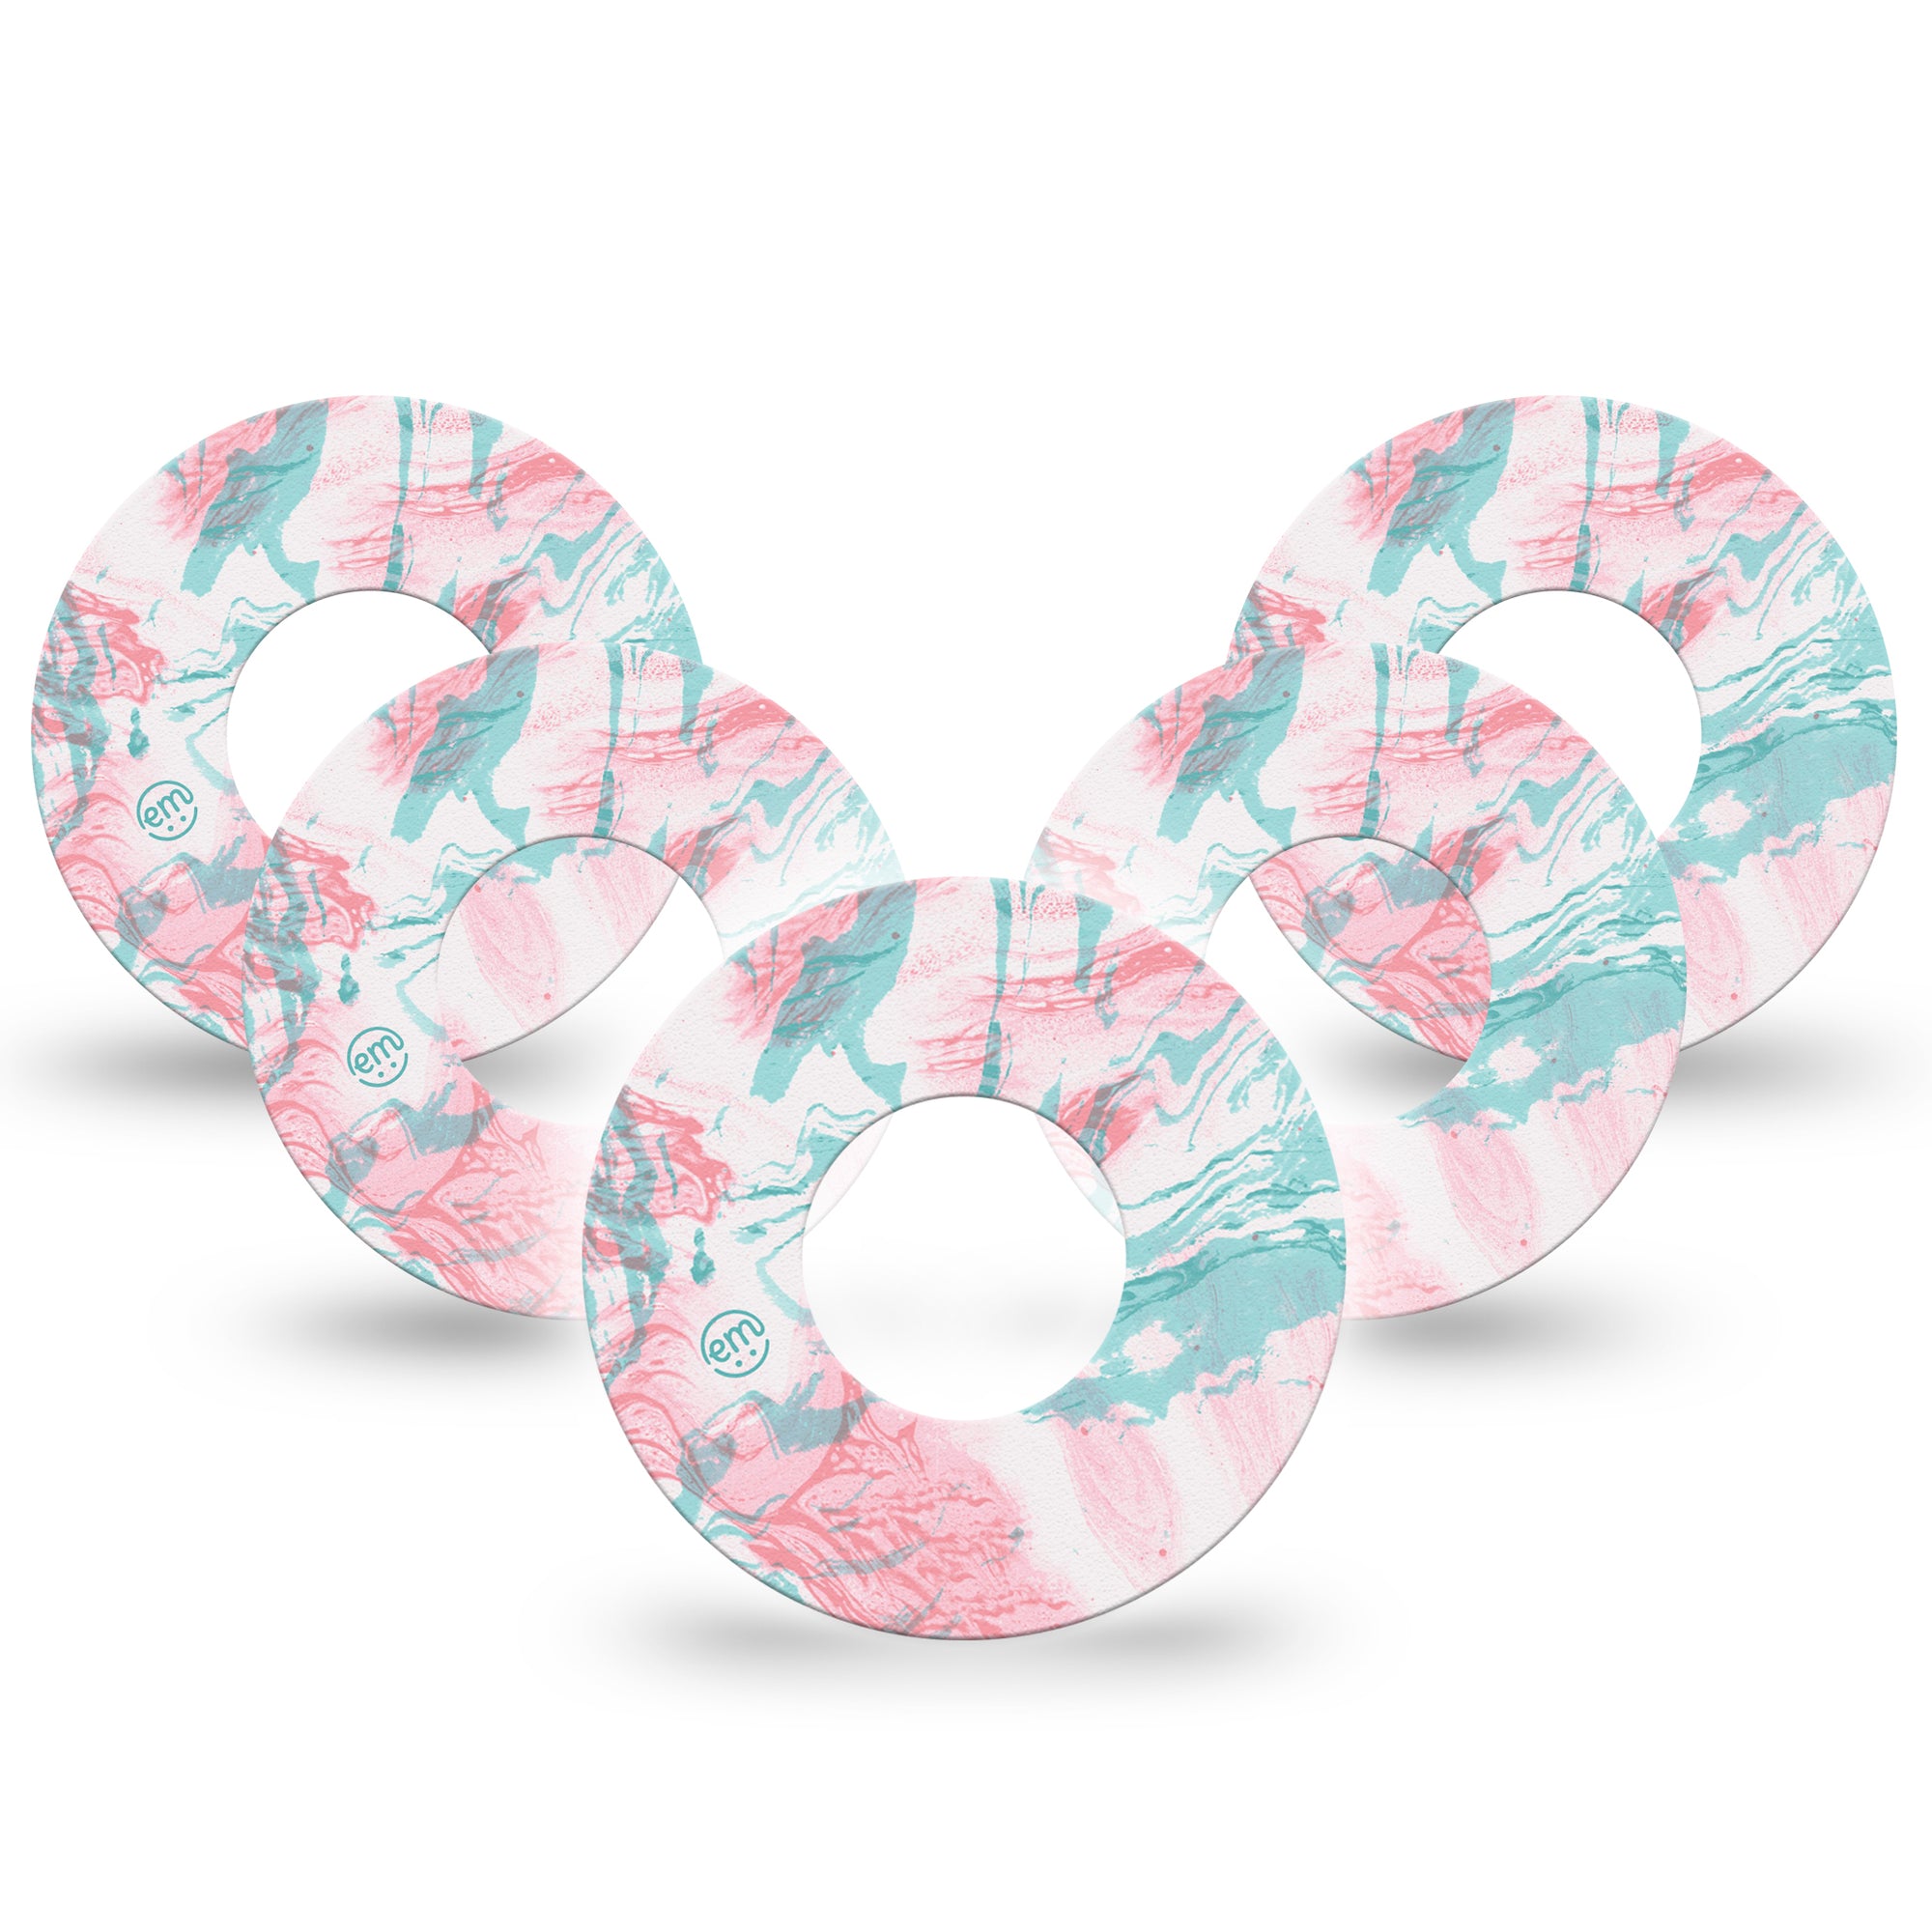 ExpressionMed Marbling Pastels Libre Tape Pack